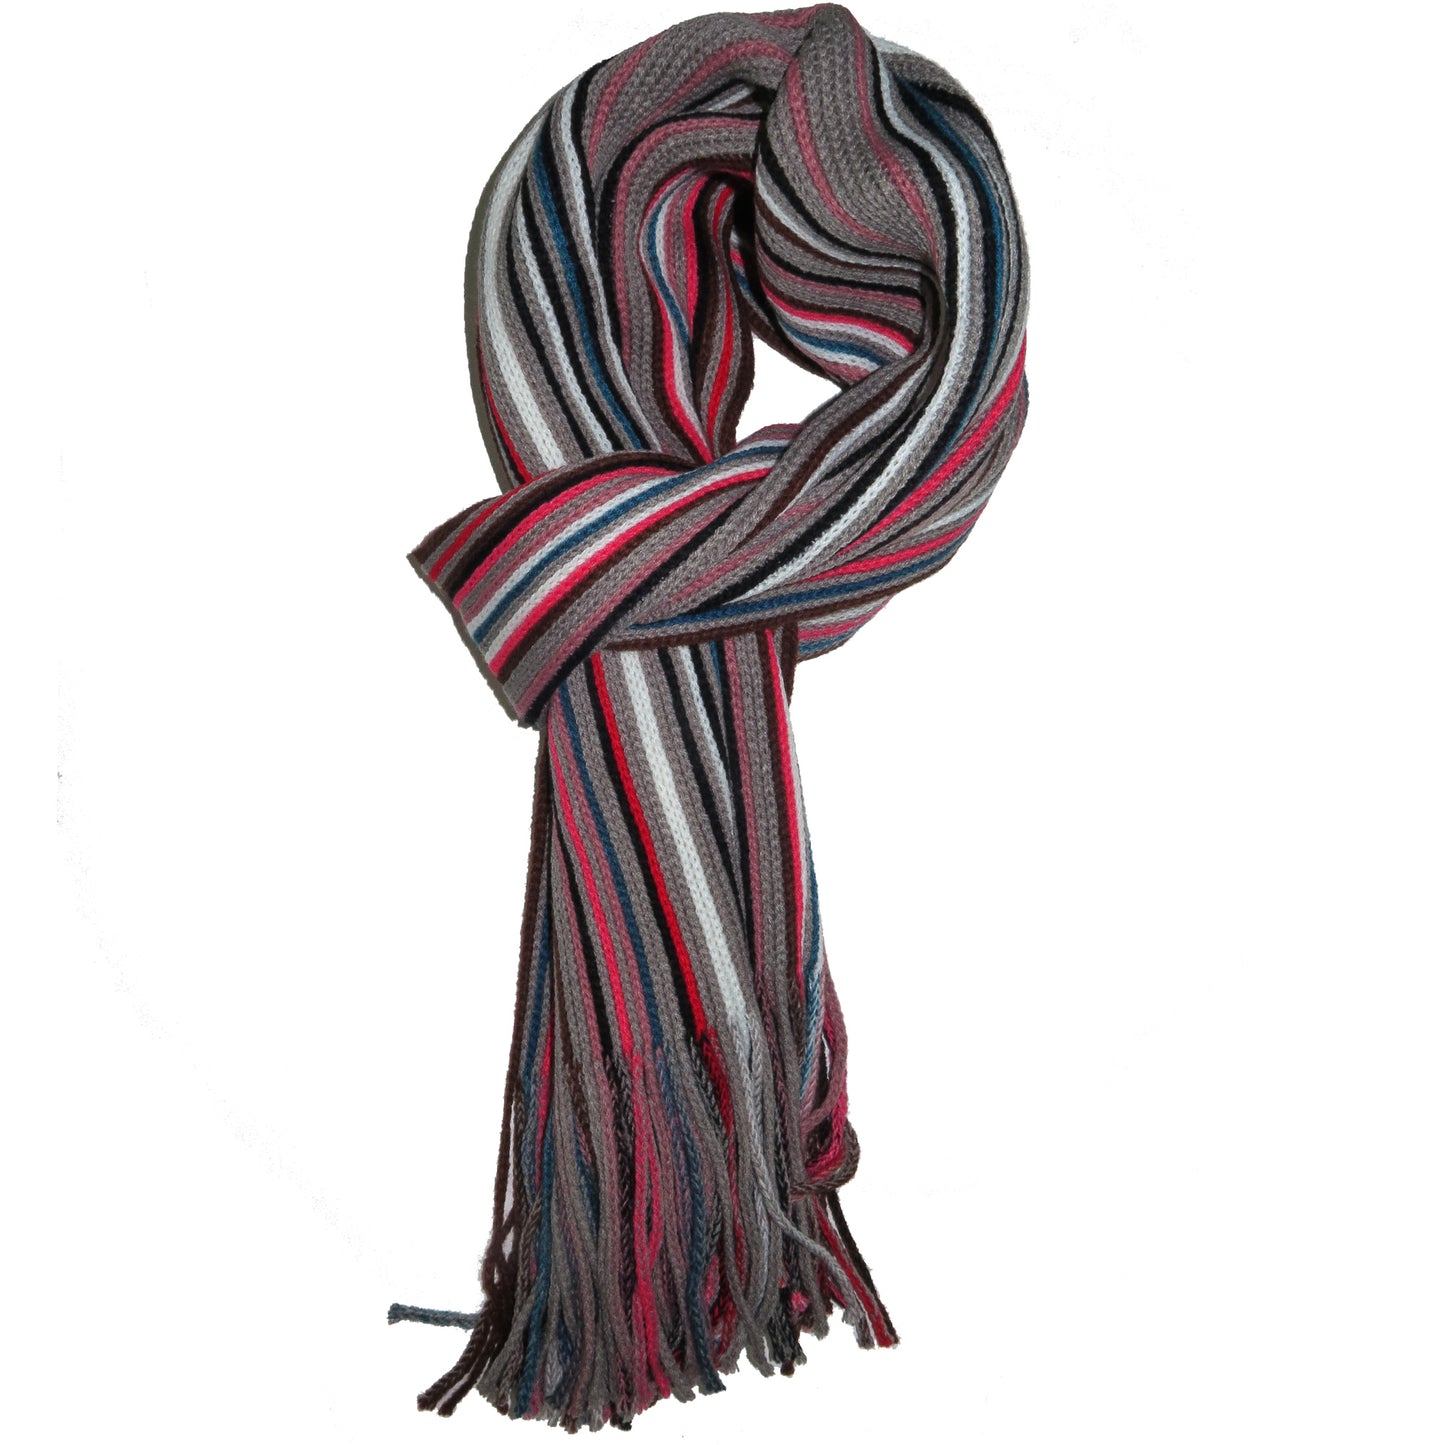 Striped Knit Scarf - Colorful and Warm